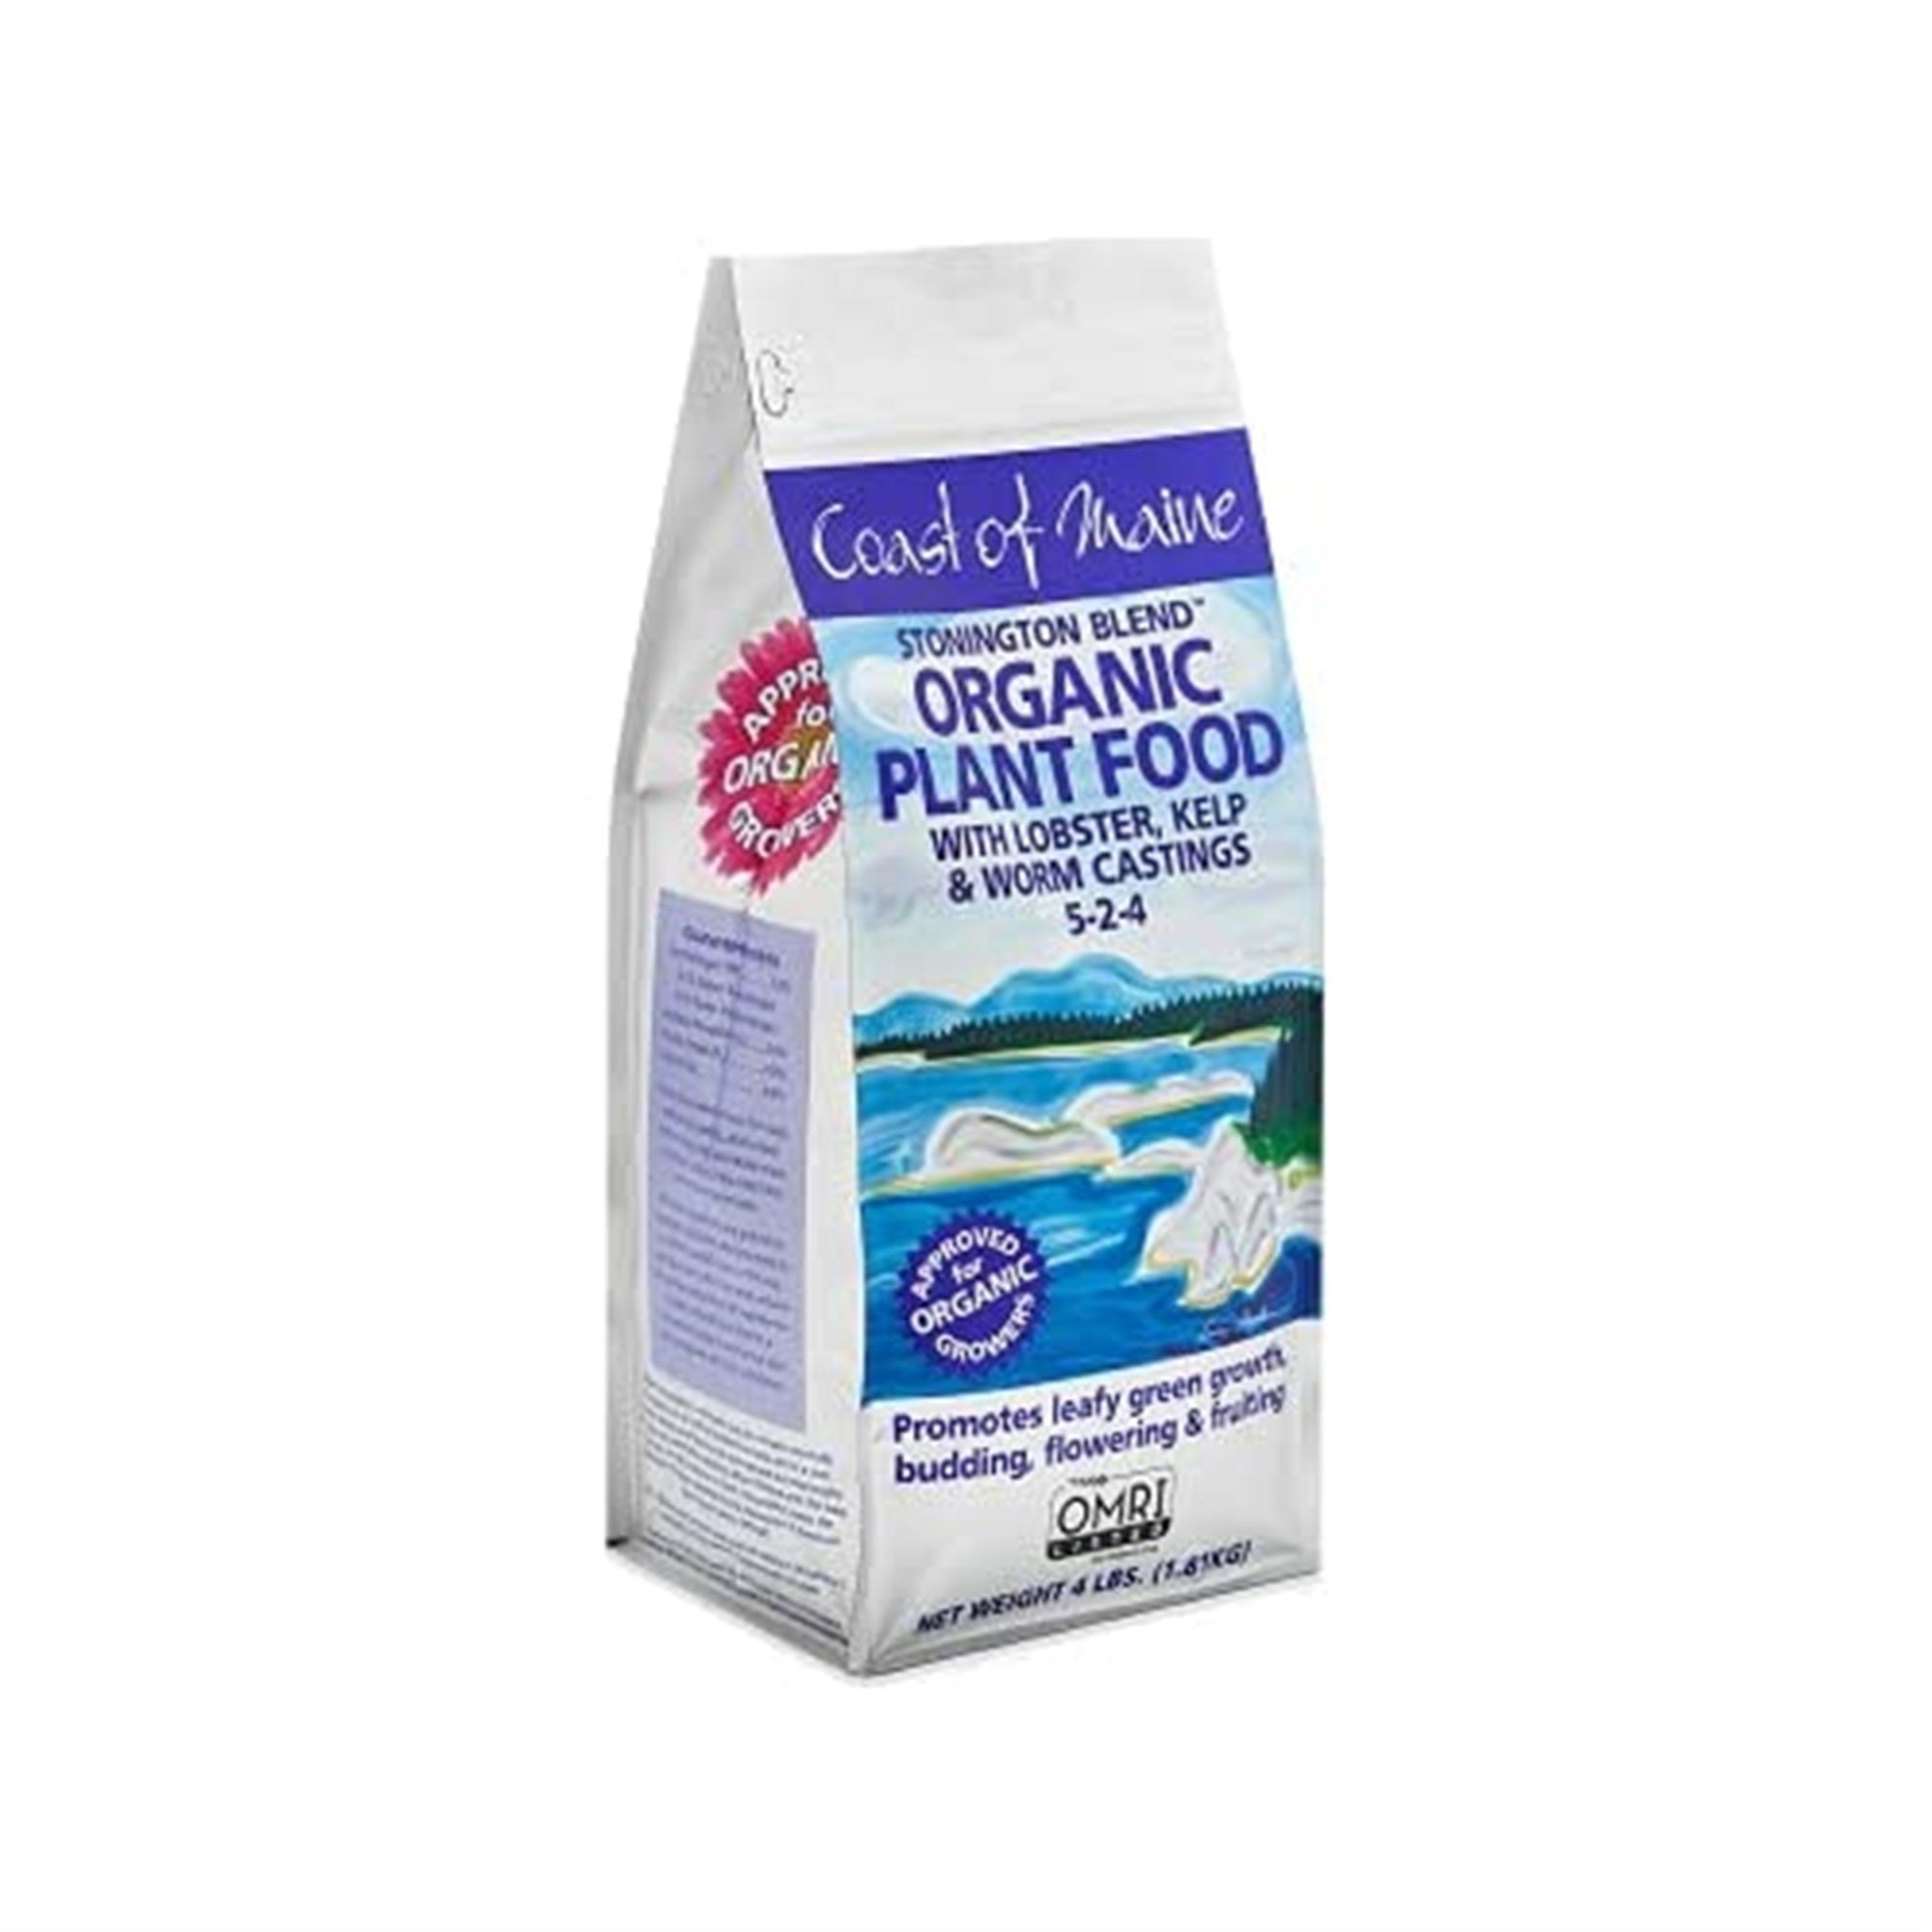 Coast of Maine 5-2-4 Stonington Blend Organic Plant Food with Lobster, Kelp and Worm Castings, 4lbs